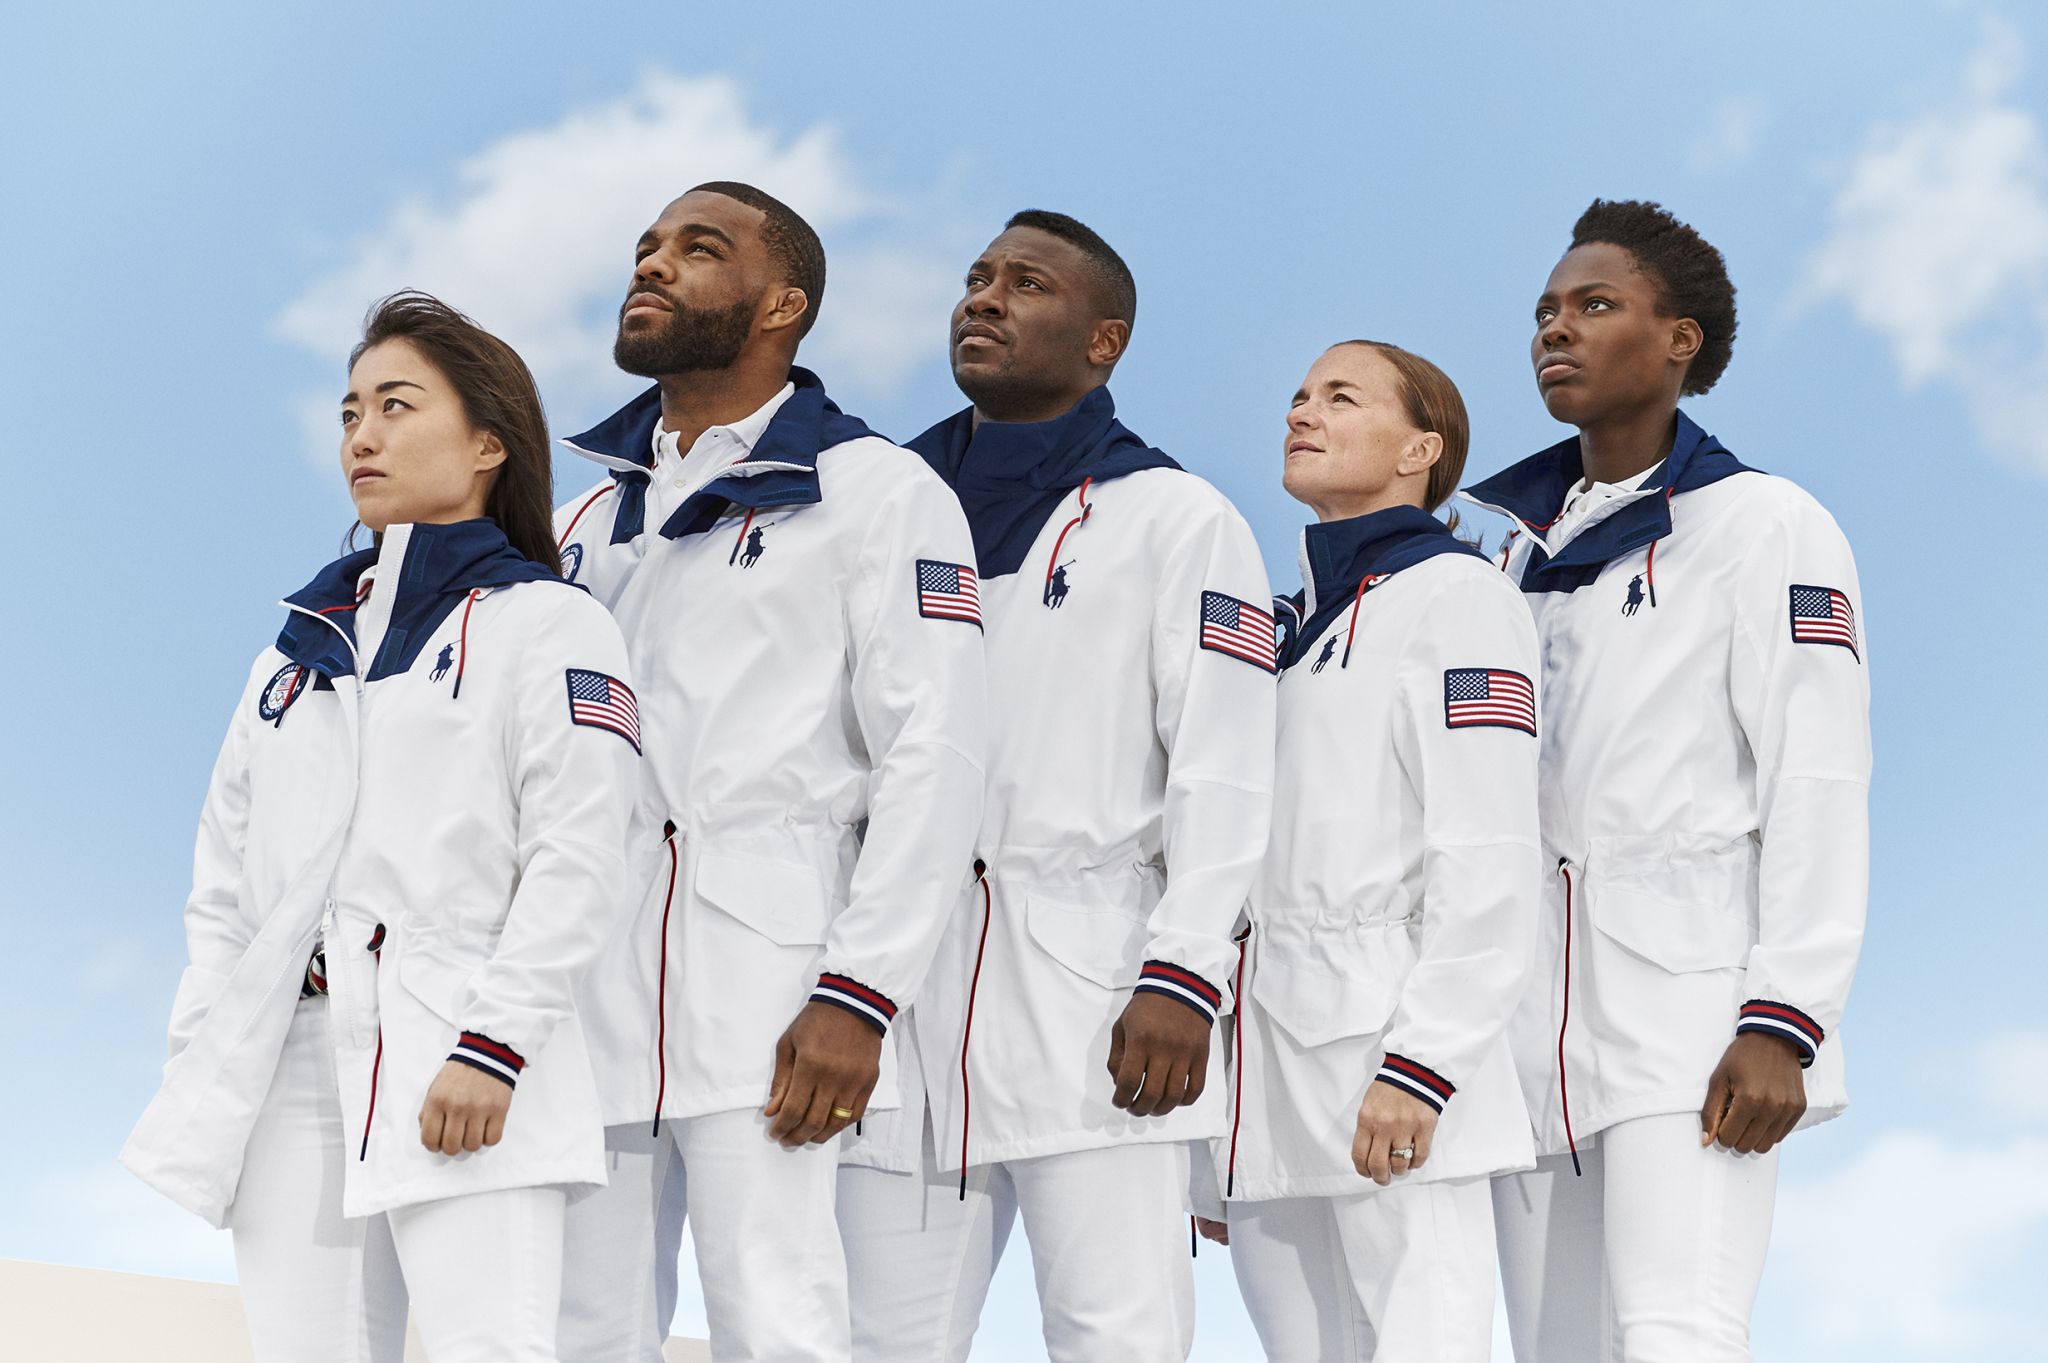 Polo Ralph Lauren releases Team USA uniforms for summer Olympics